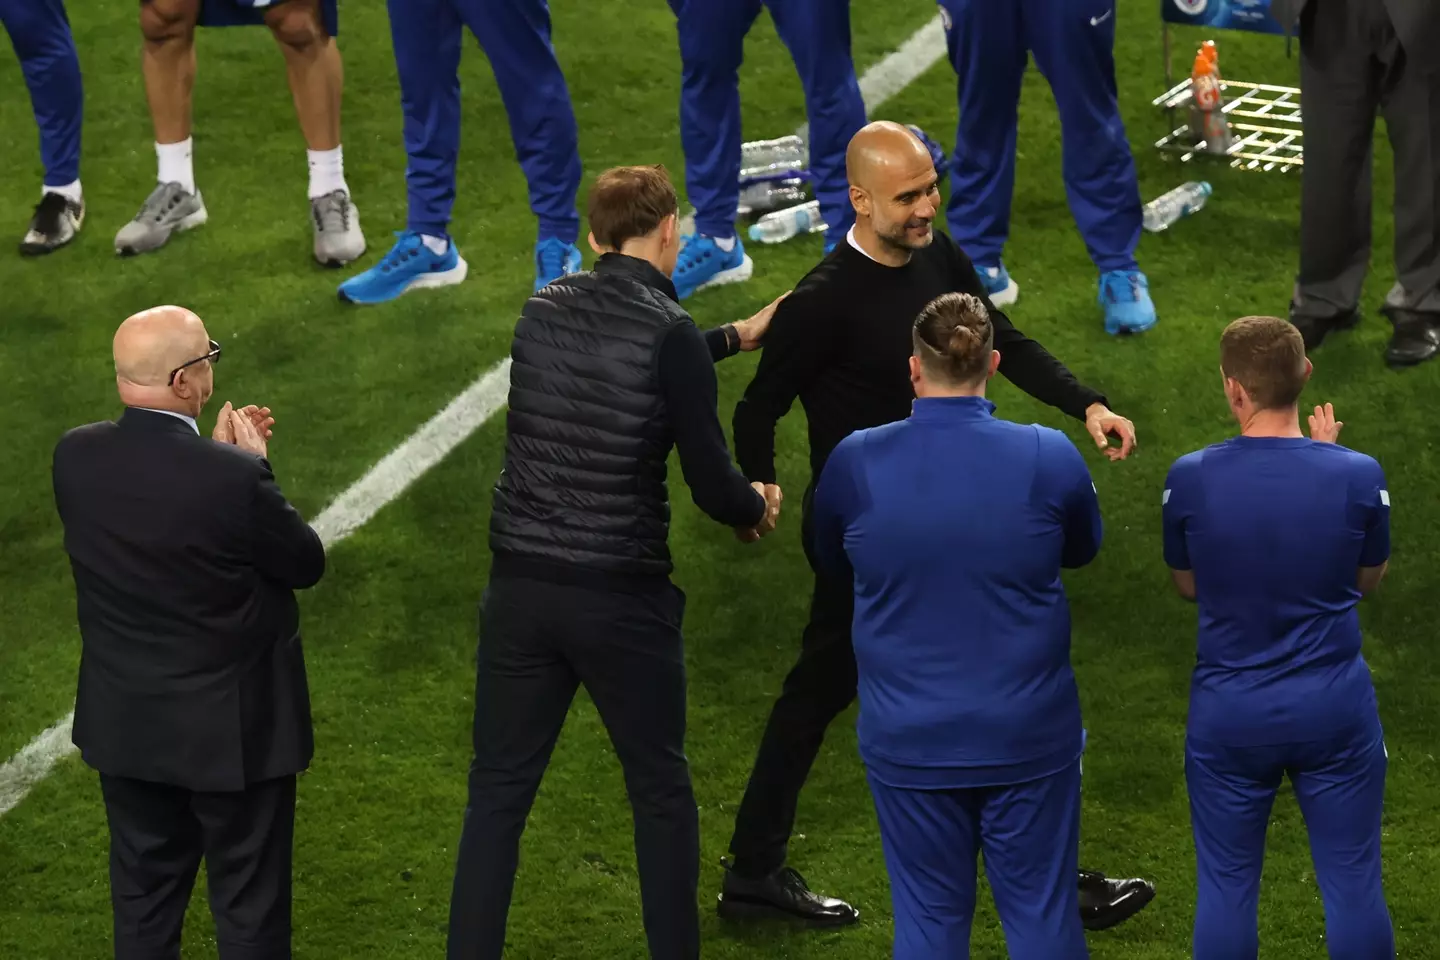 Thomas Tuchel shakes hands with Pep Guardiola following Chelsea's victory over Manchester City in the Champions League final. Image: Getty